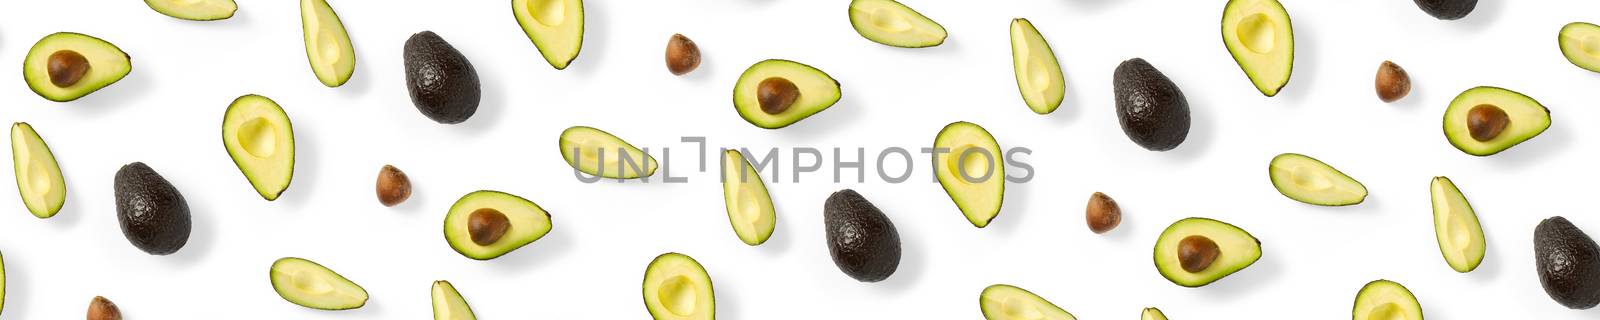 Avocado banner. Background made from isolated Avocado pieces on white background. Flat lay of fresh ripe avocados and avacado pieces. by PhotoTime